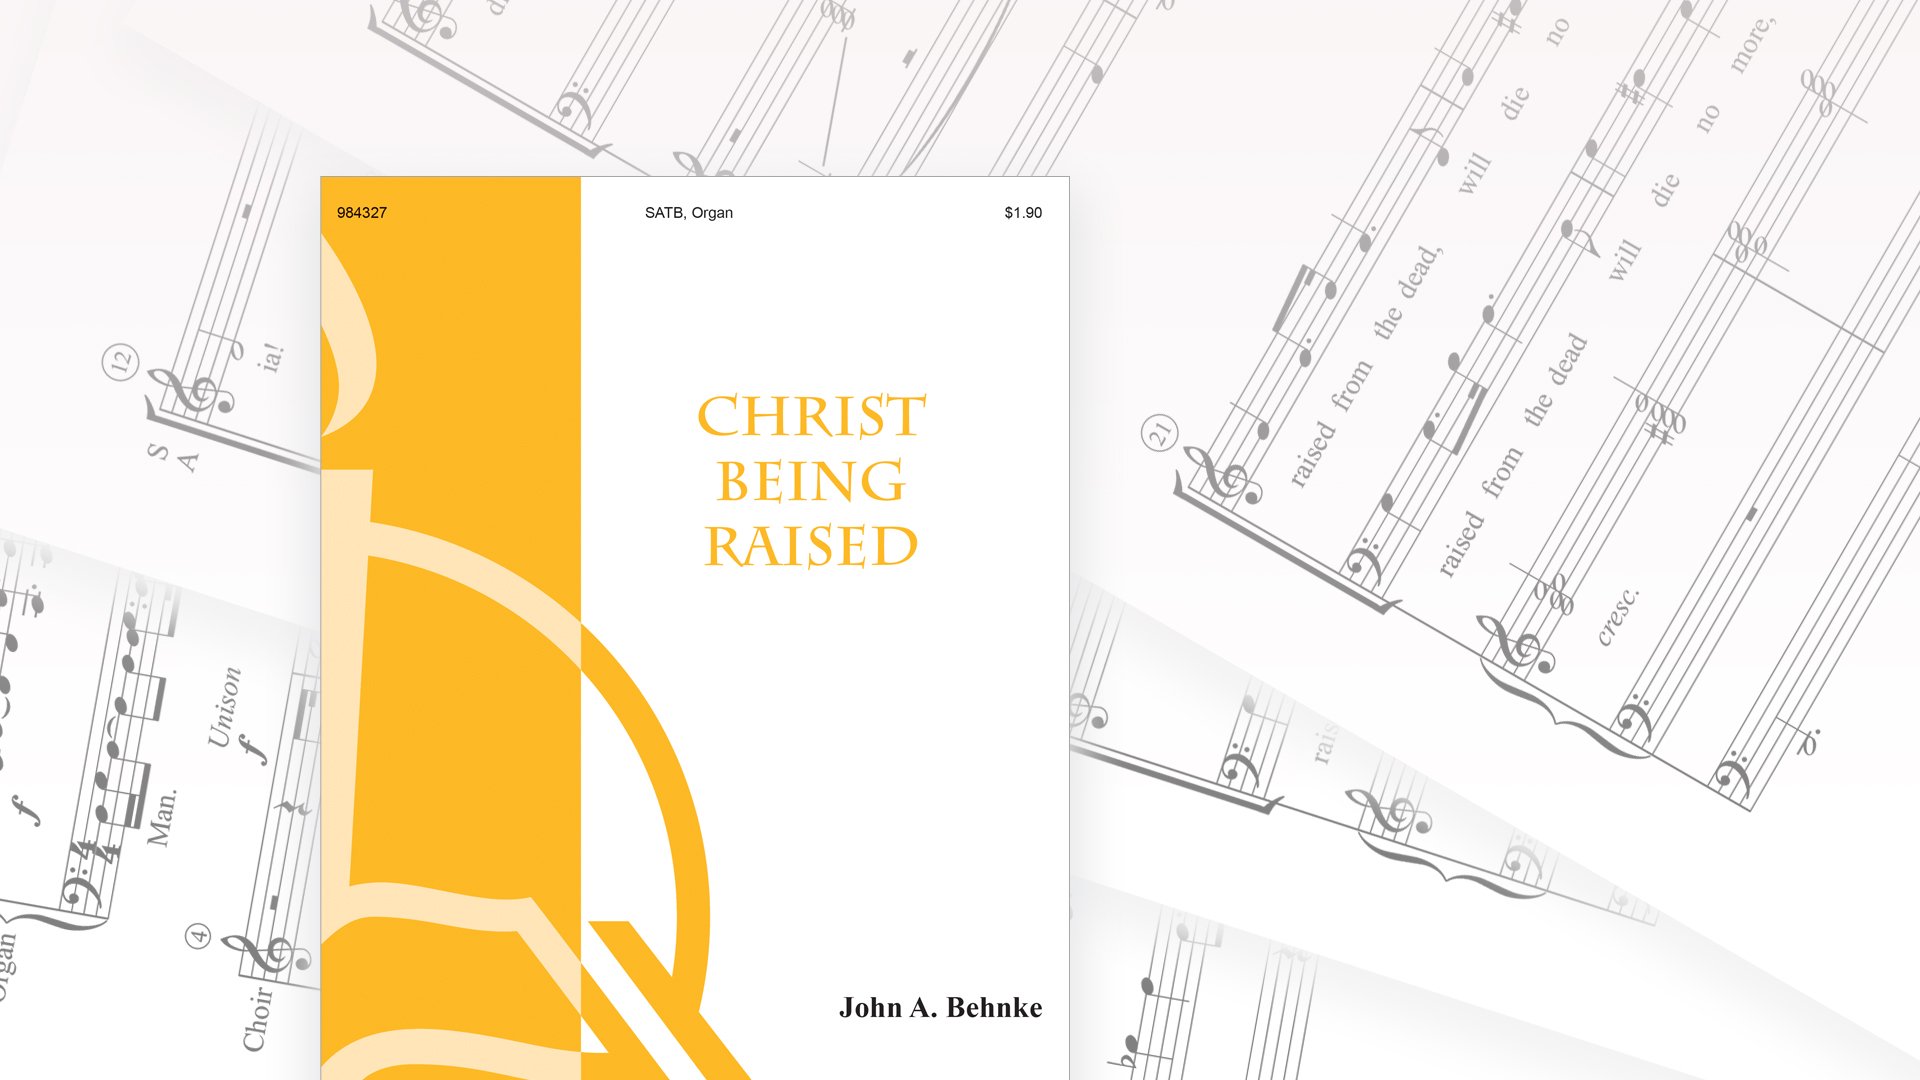 Music of the Month: Christ Being Raised